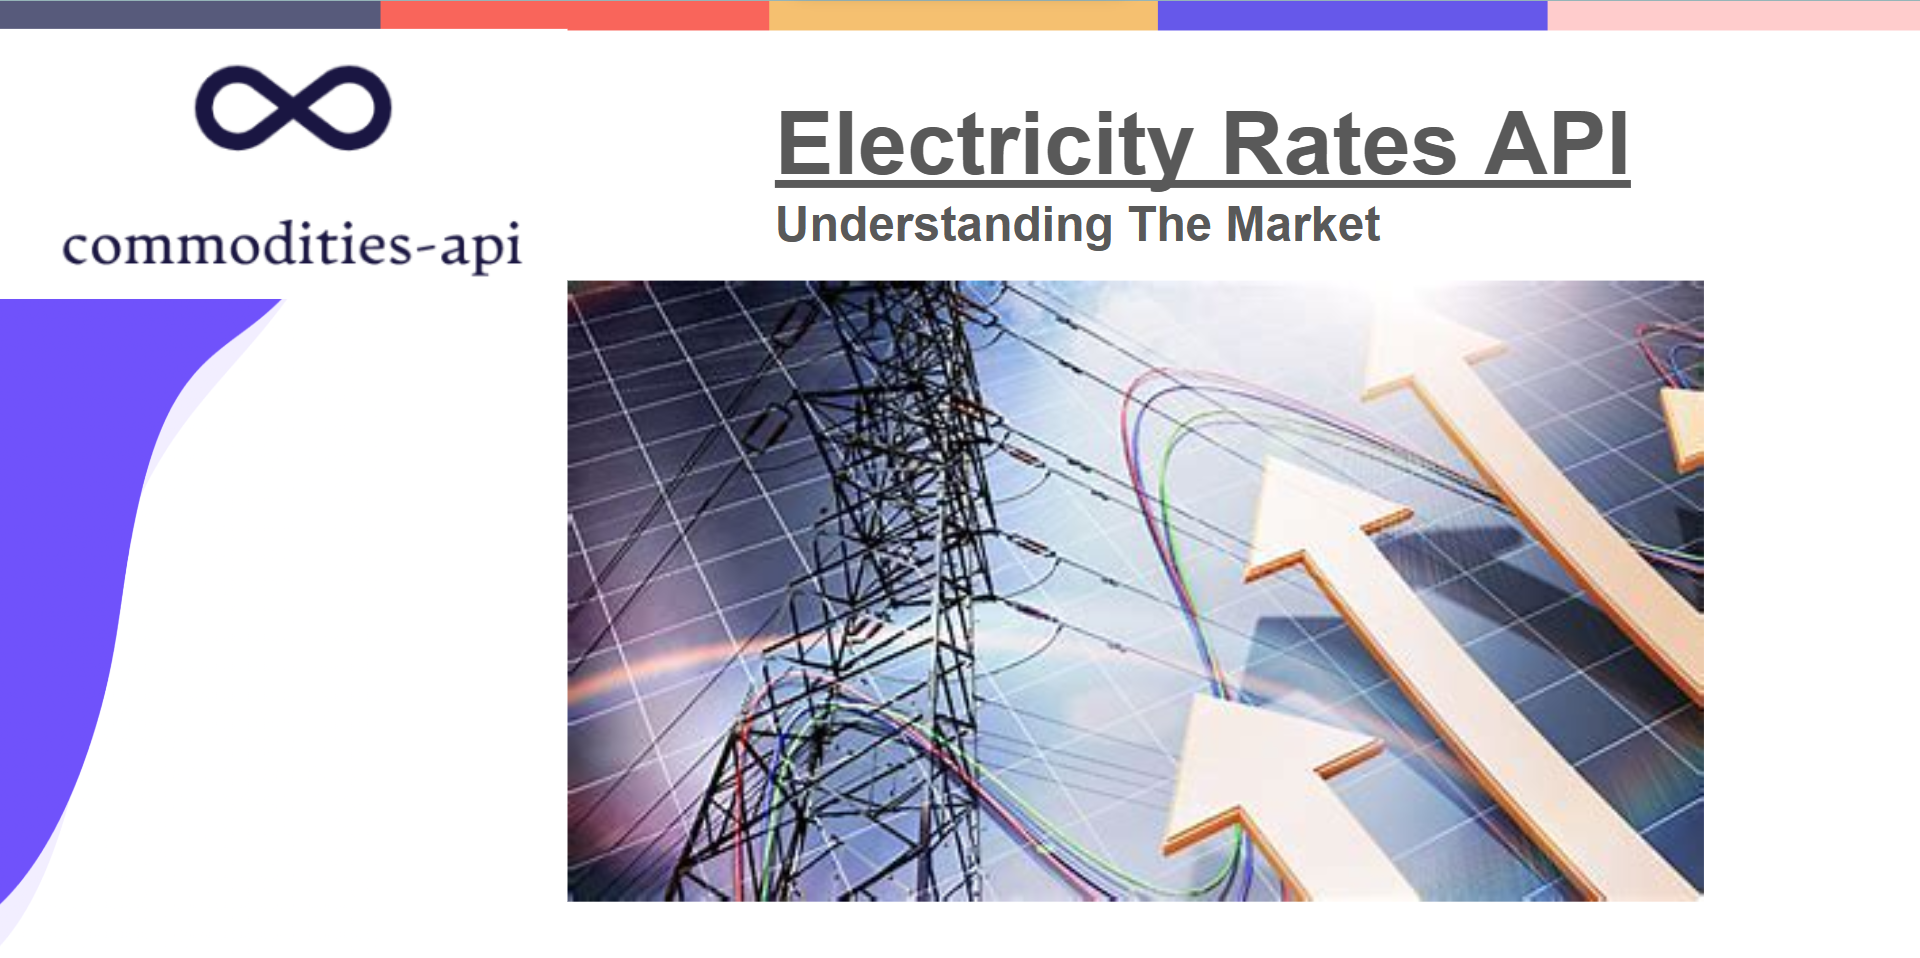 Understanding The Market With Electricity Rates API